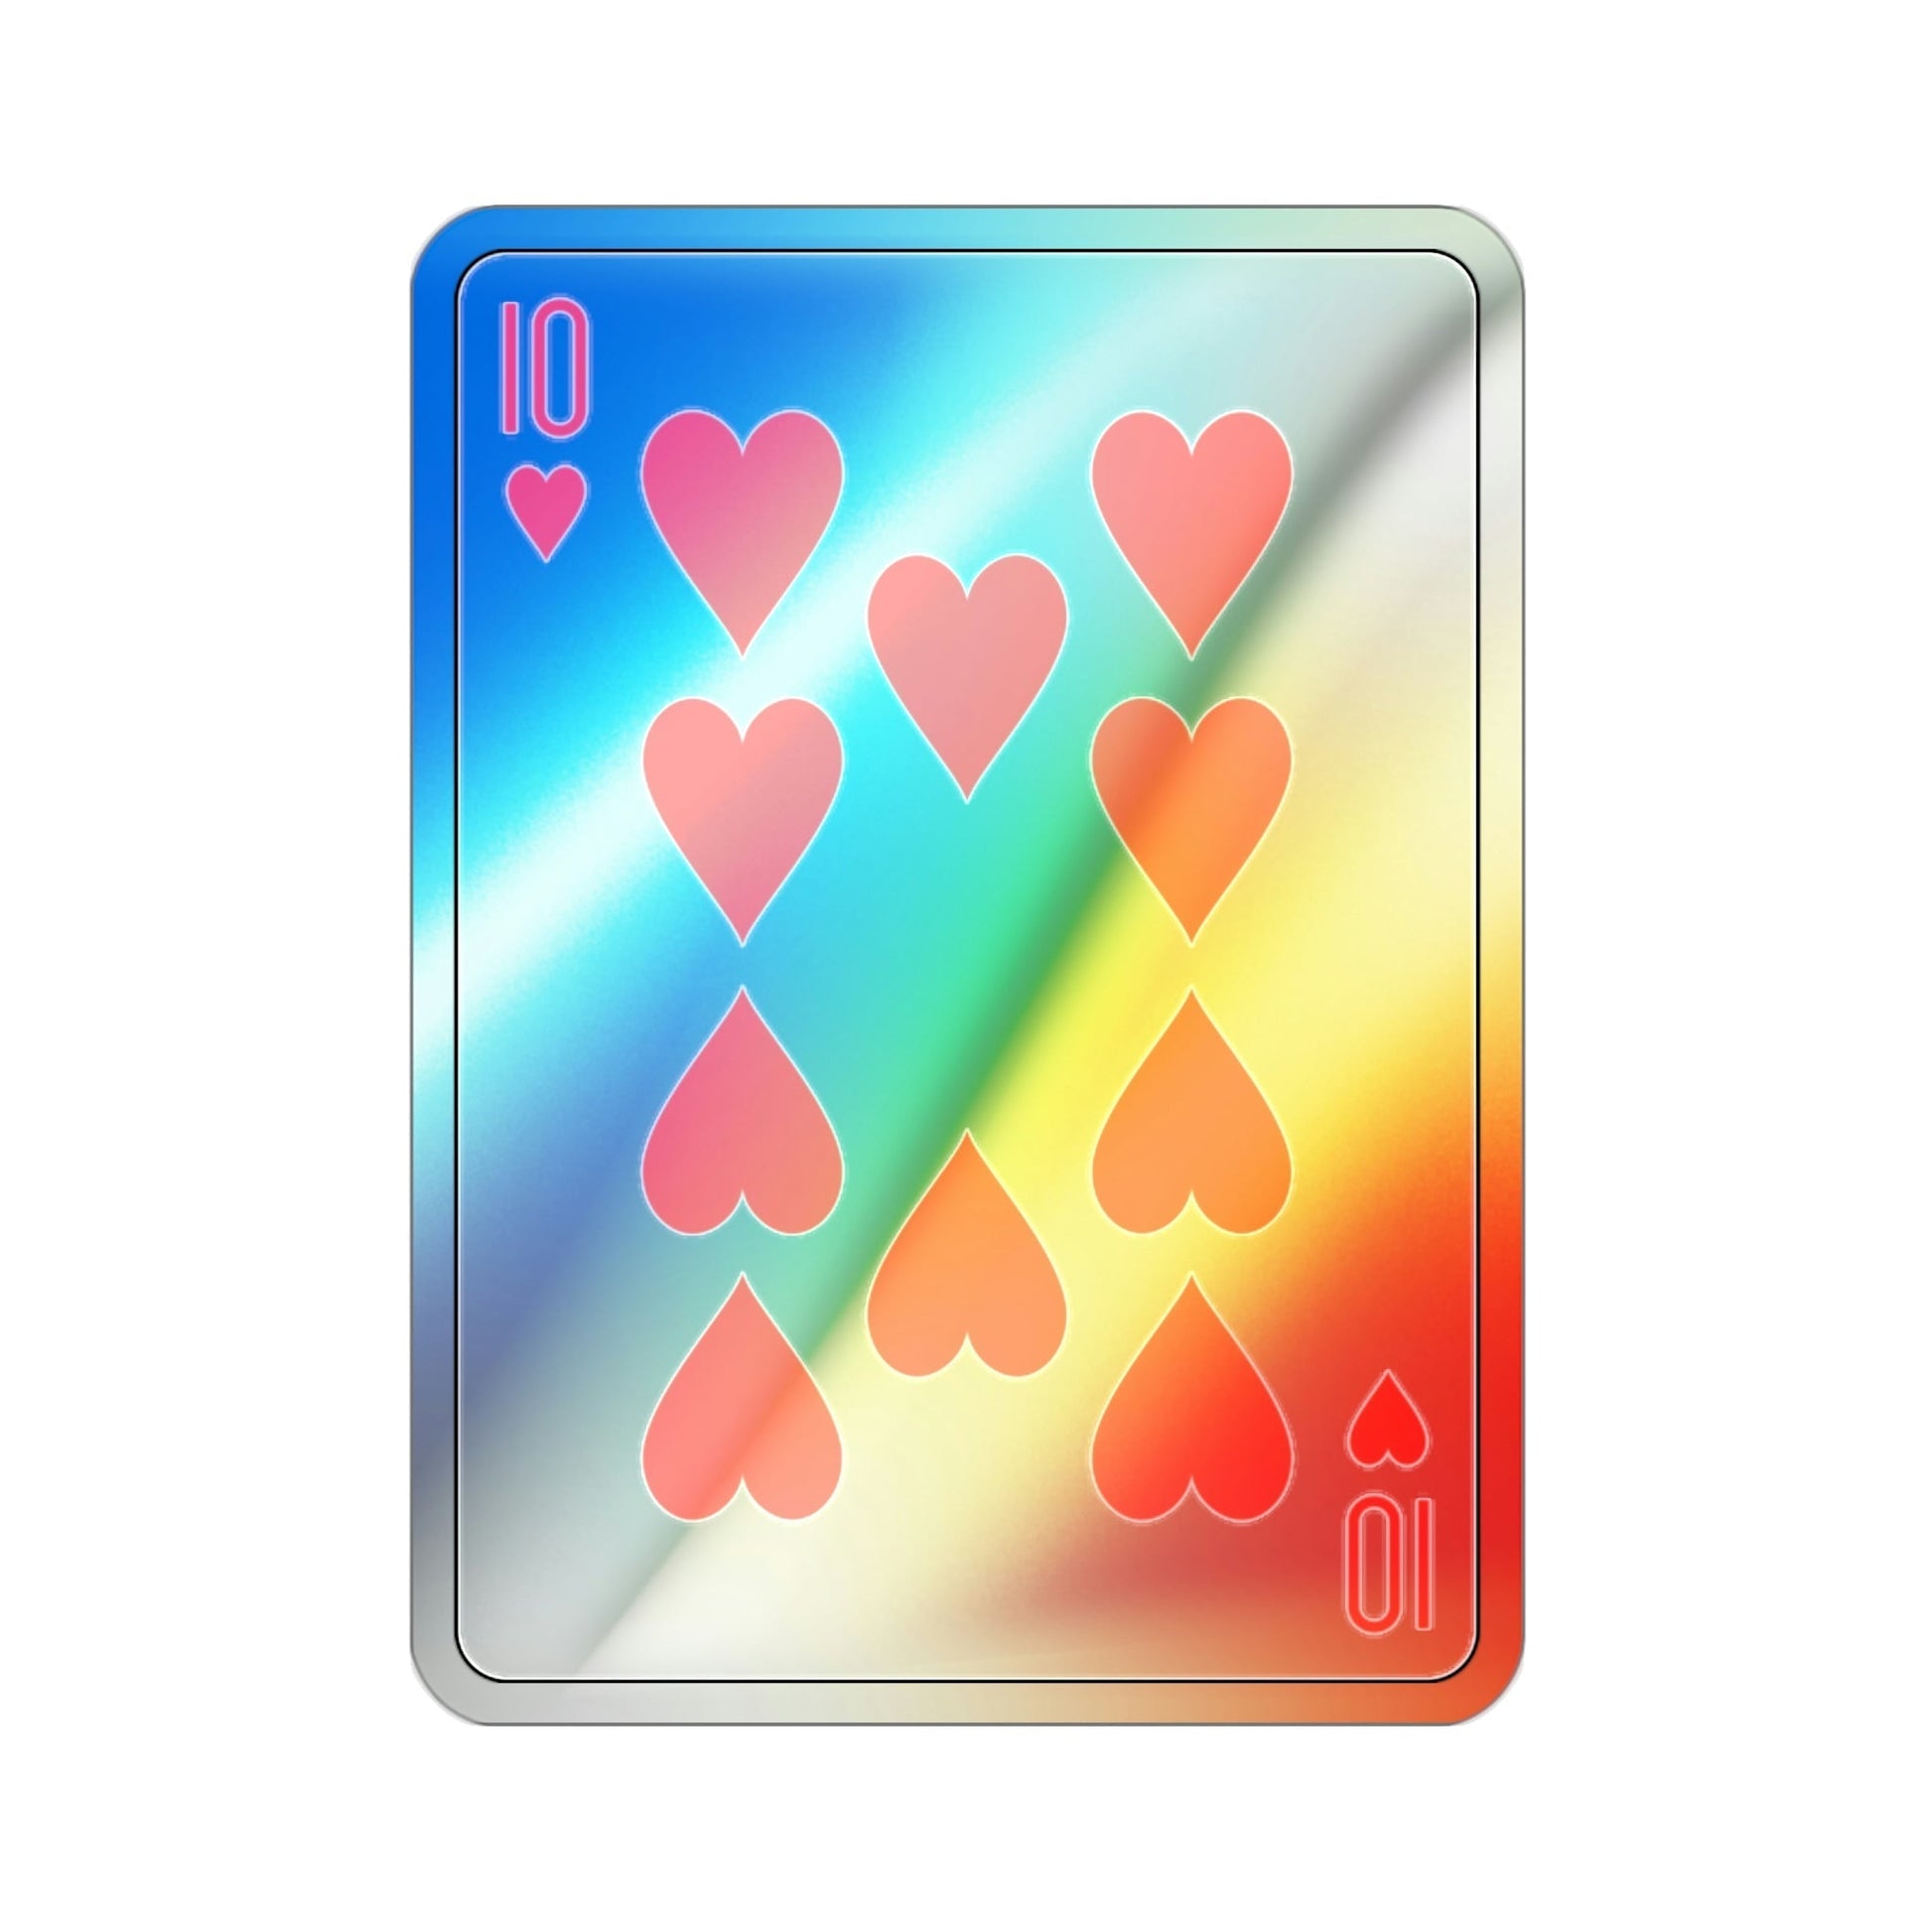 10 of Hearts Playing Card Holographic STICKER Die-Cut Vinyl Decal-2 Inch-The Sticker Space